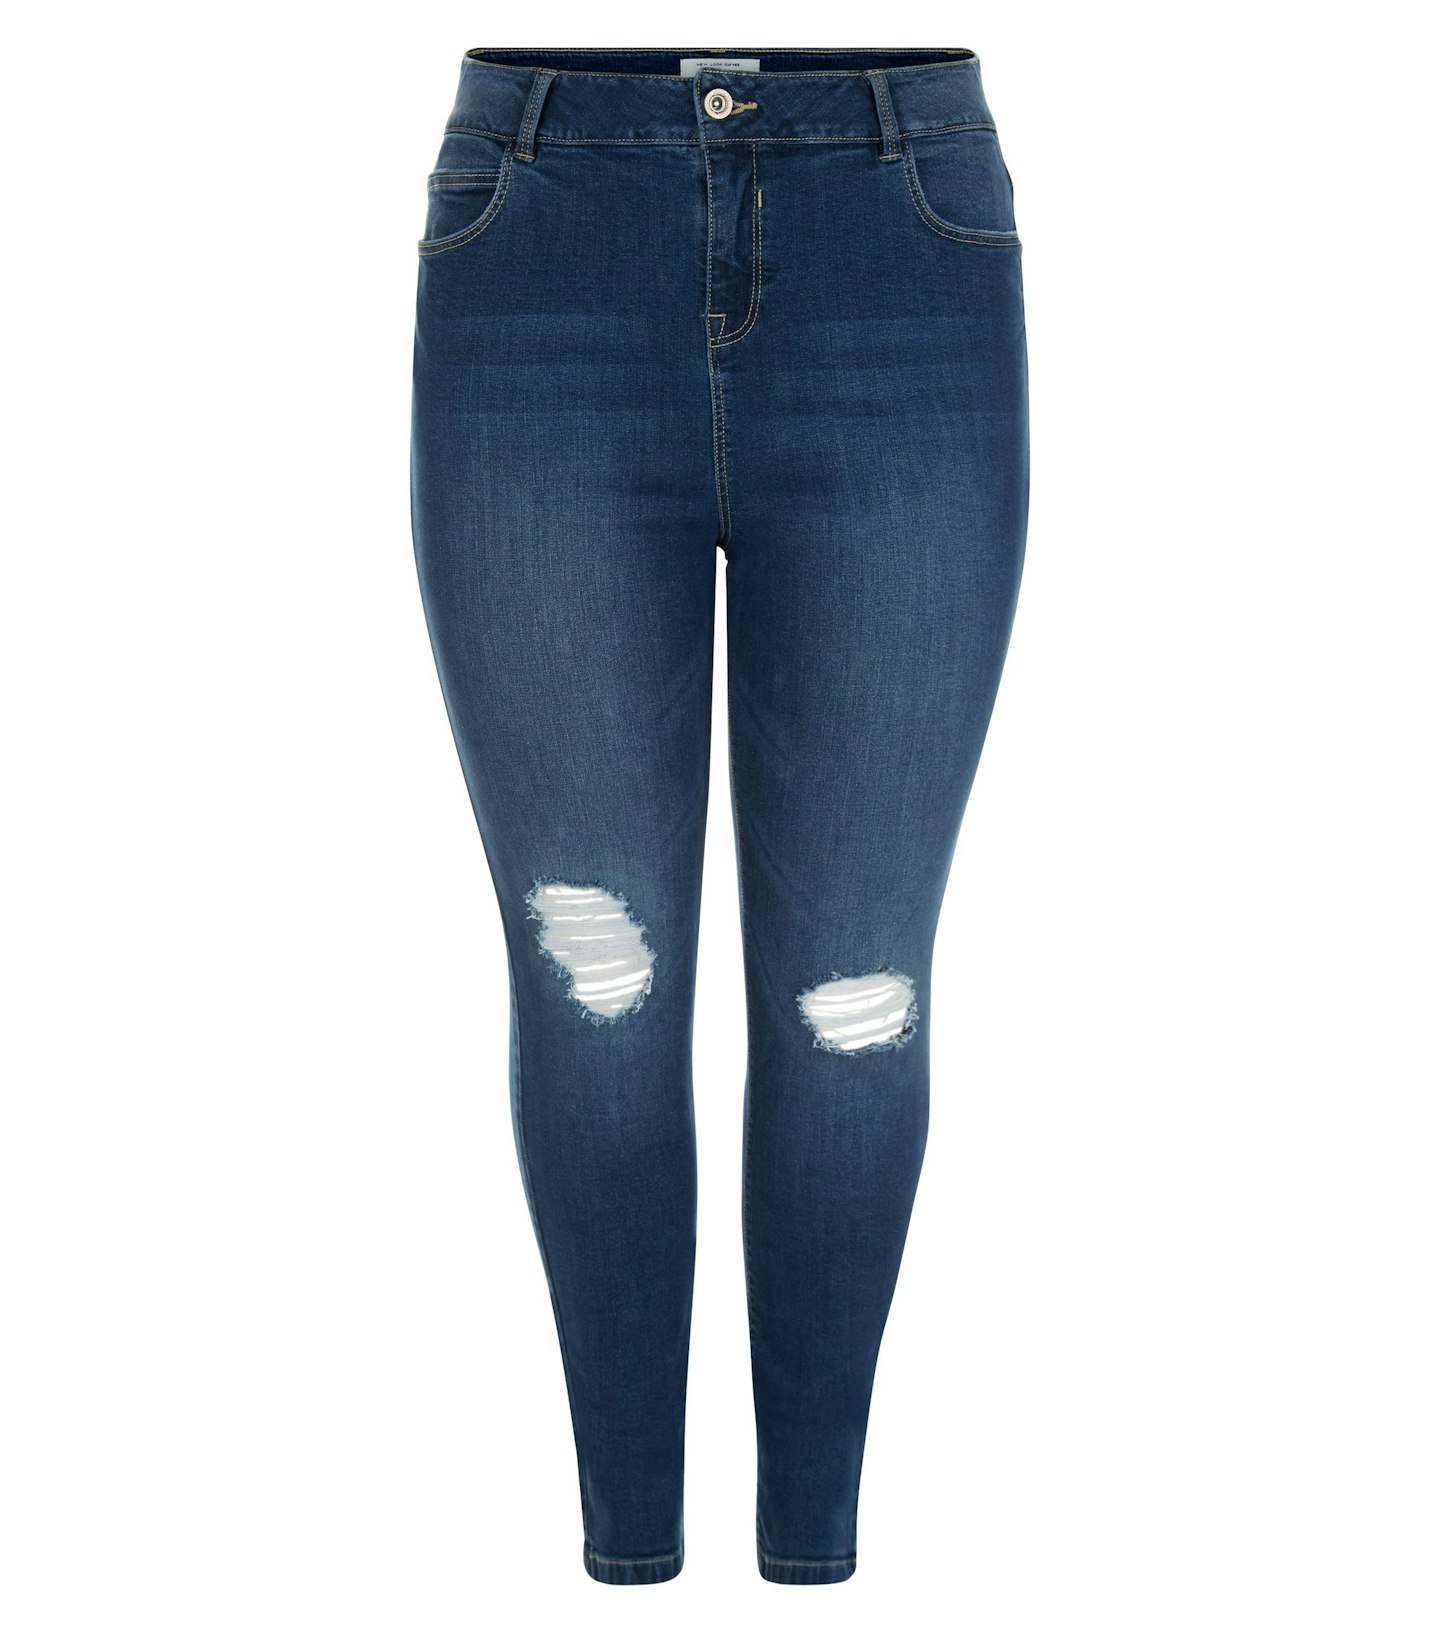 Jeans £24.99